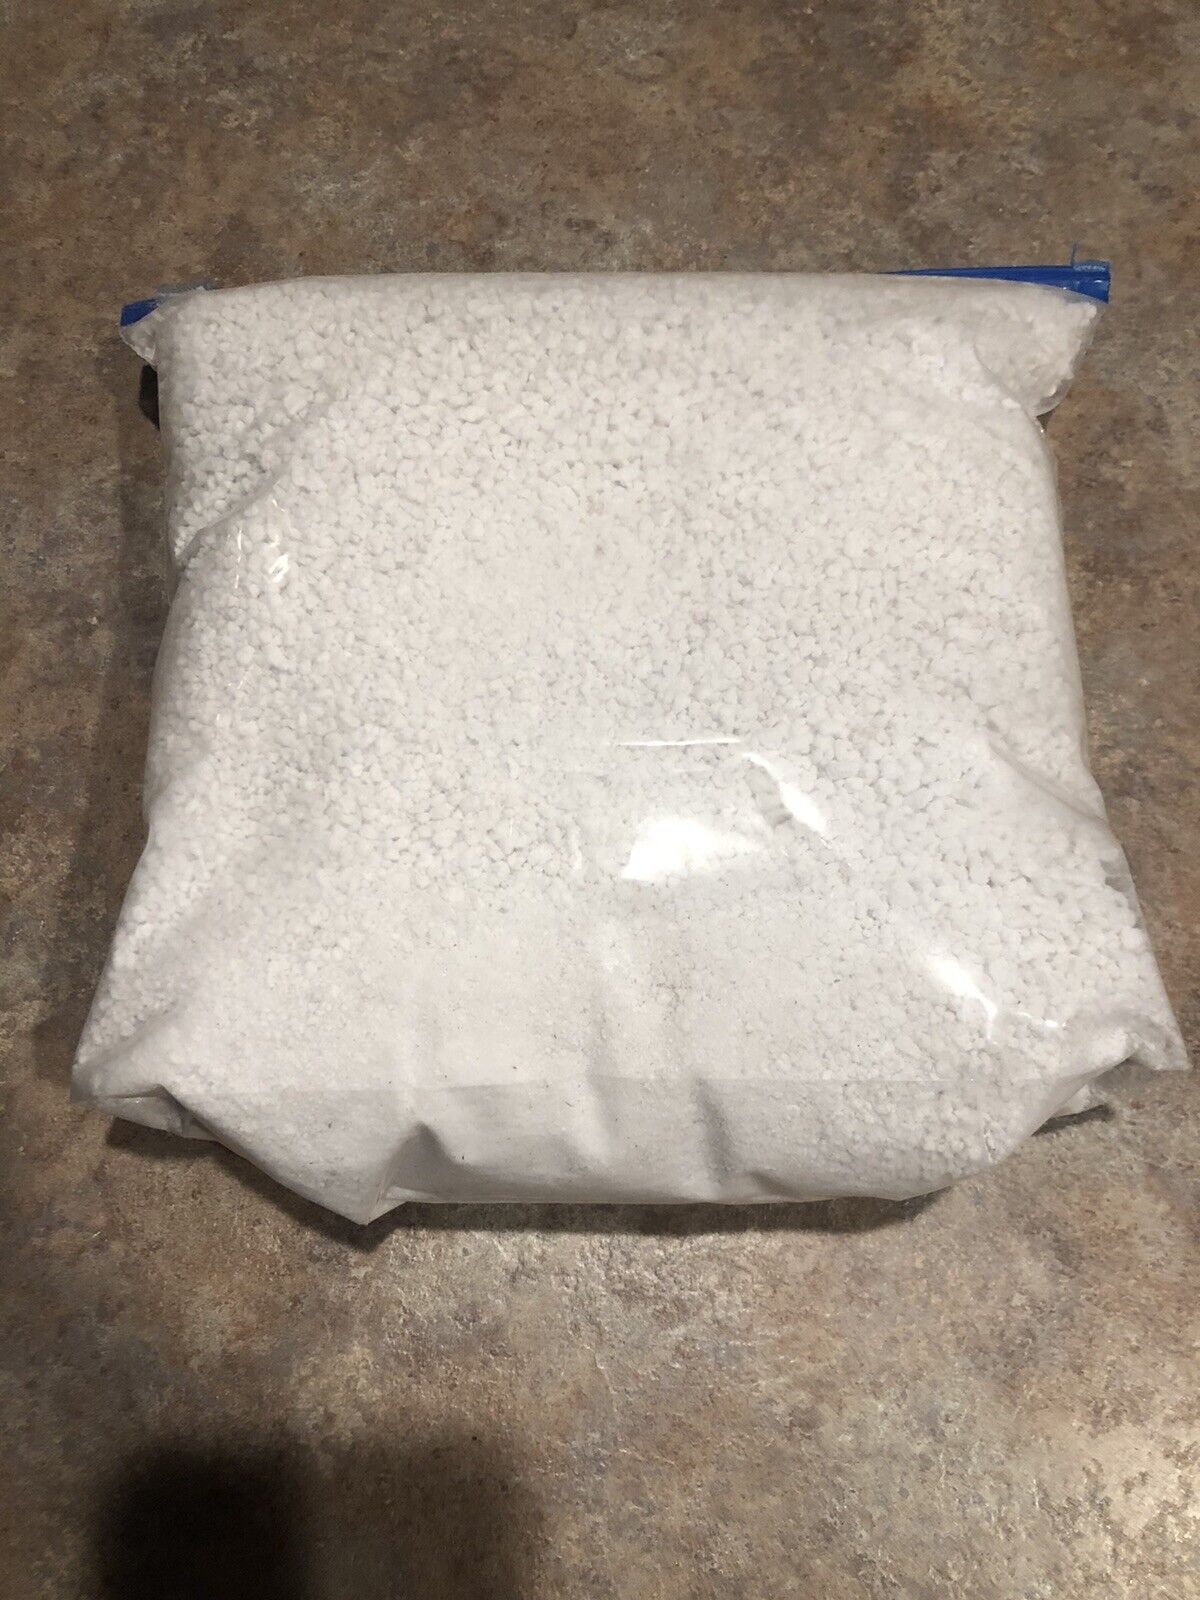 1 Gallon Of Perlite For Seed Starting, Hydroponics, and Garden/Potting Soil